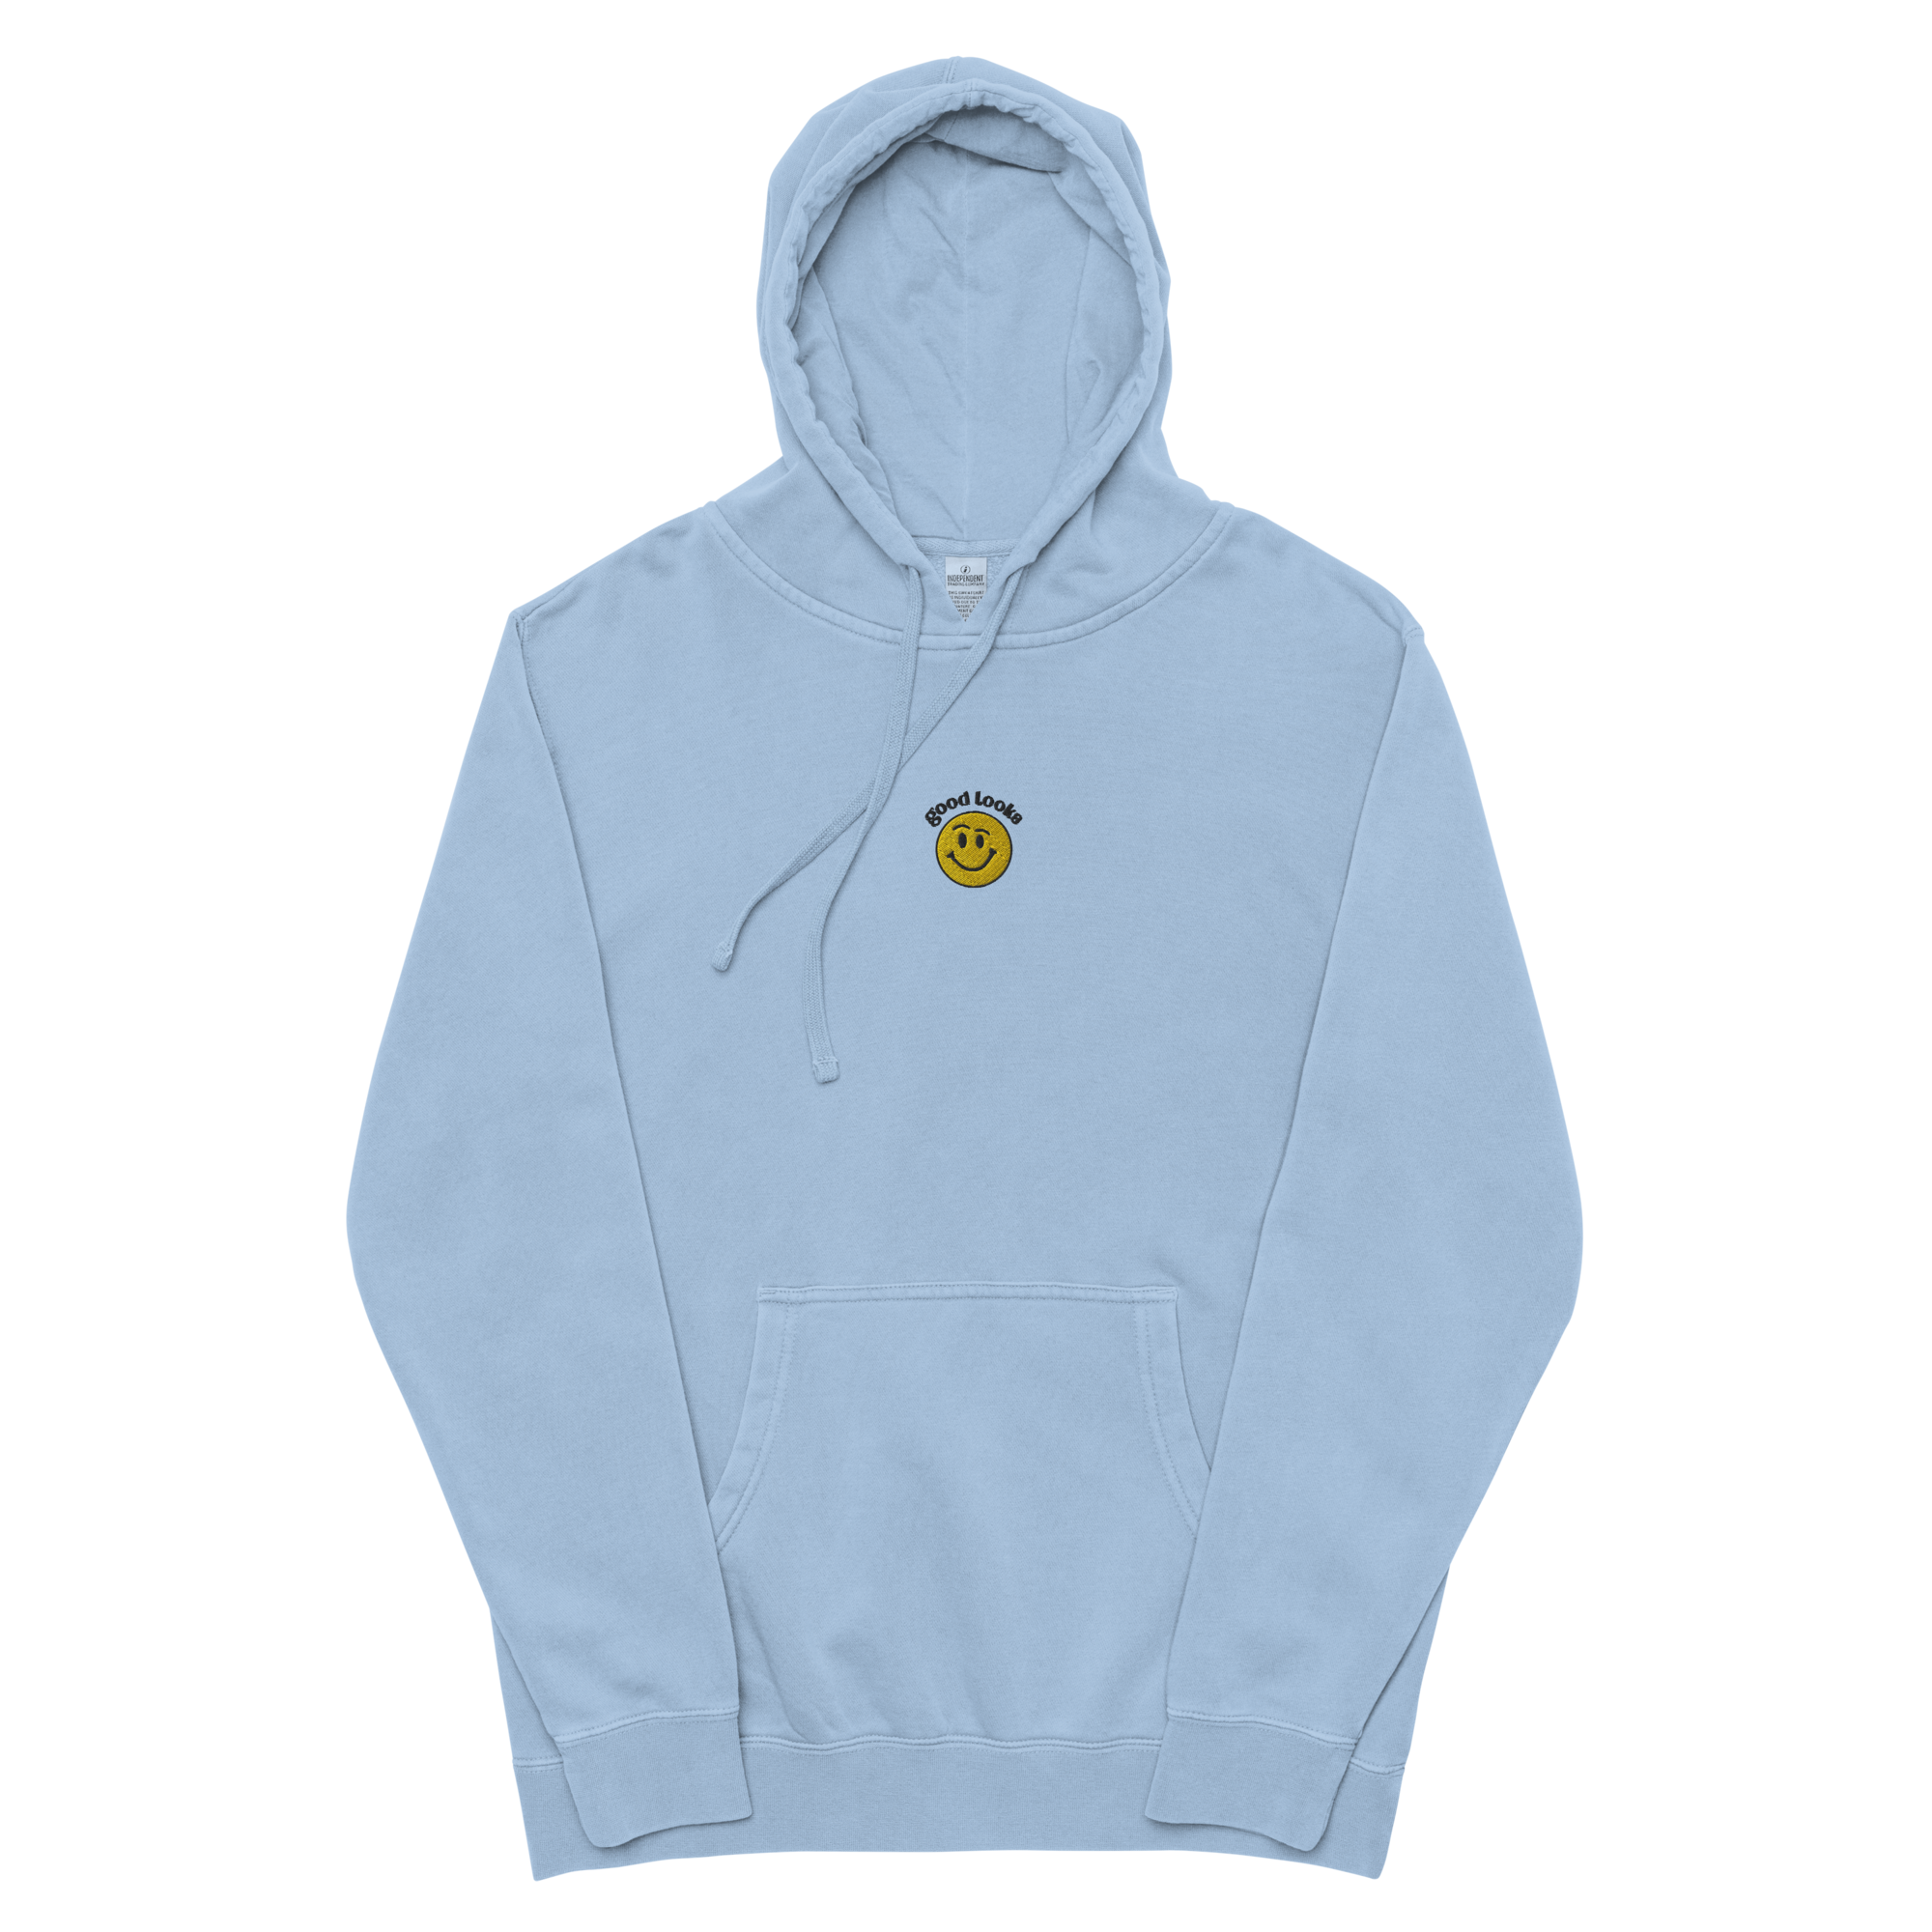 Smiley Embroidered Hoodie